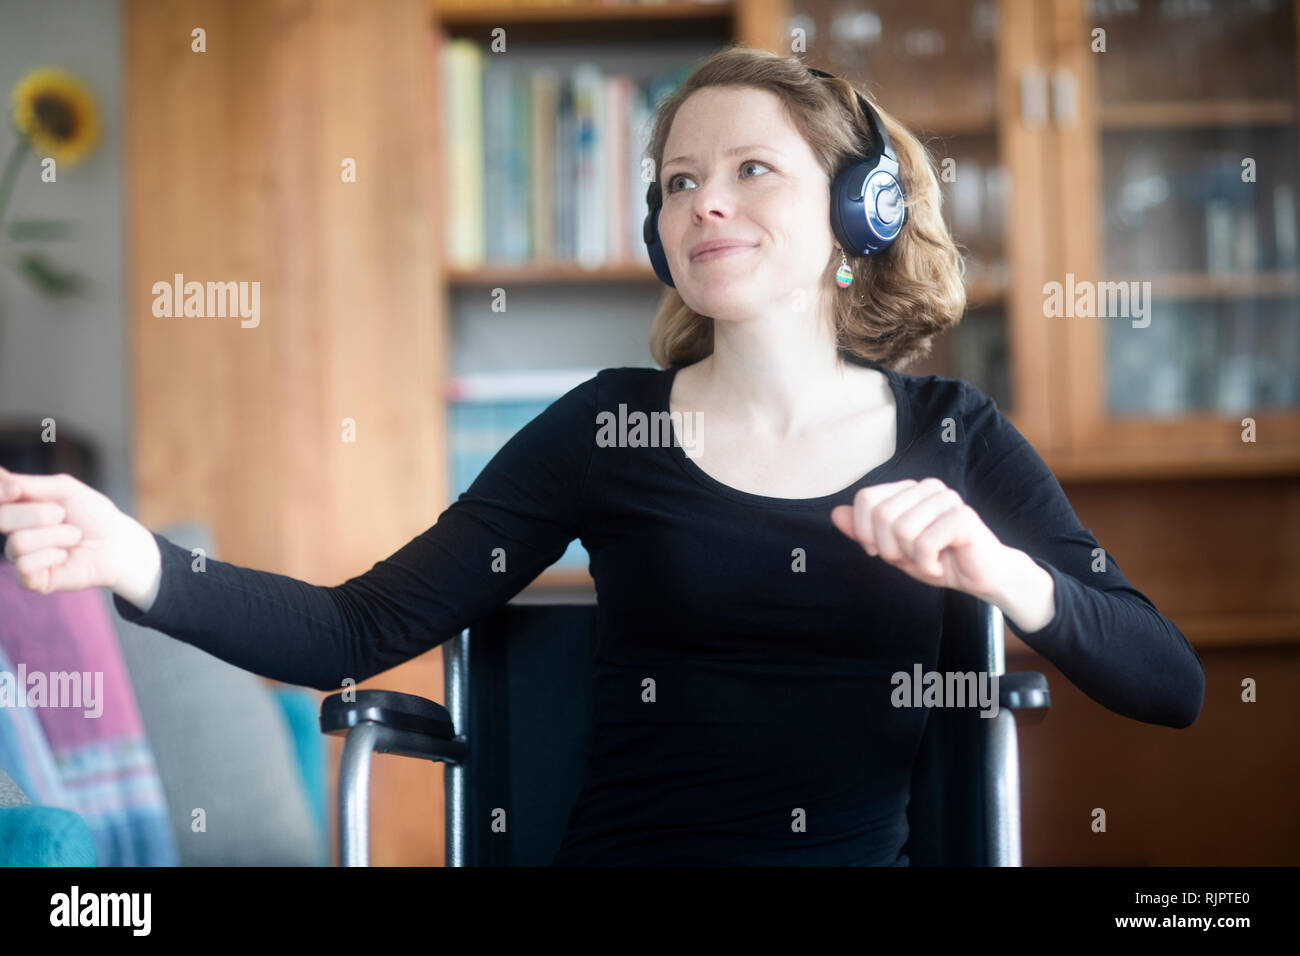 Woman in wheelchair dancing to music on headphones Stock Photo